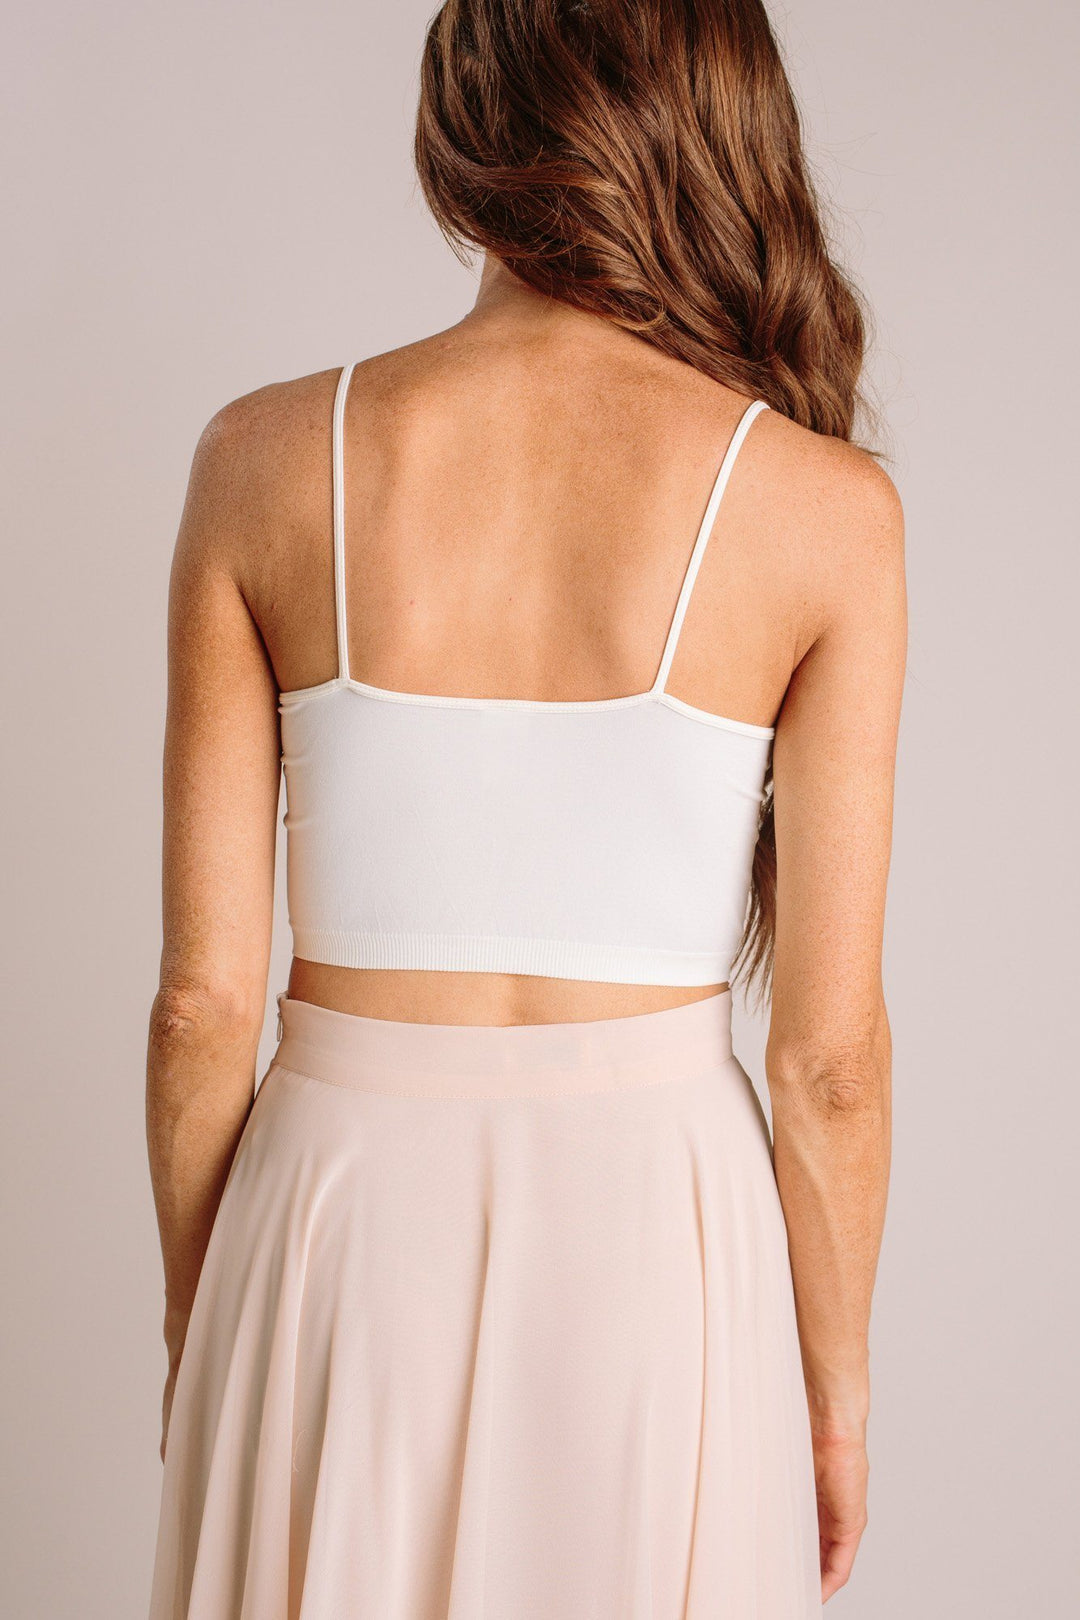 Cropped Cami - Amy - Morning Lavender Online Boutique